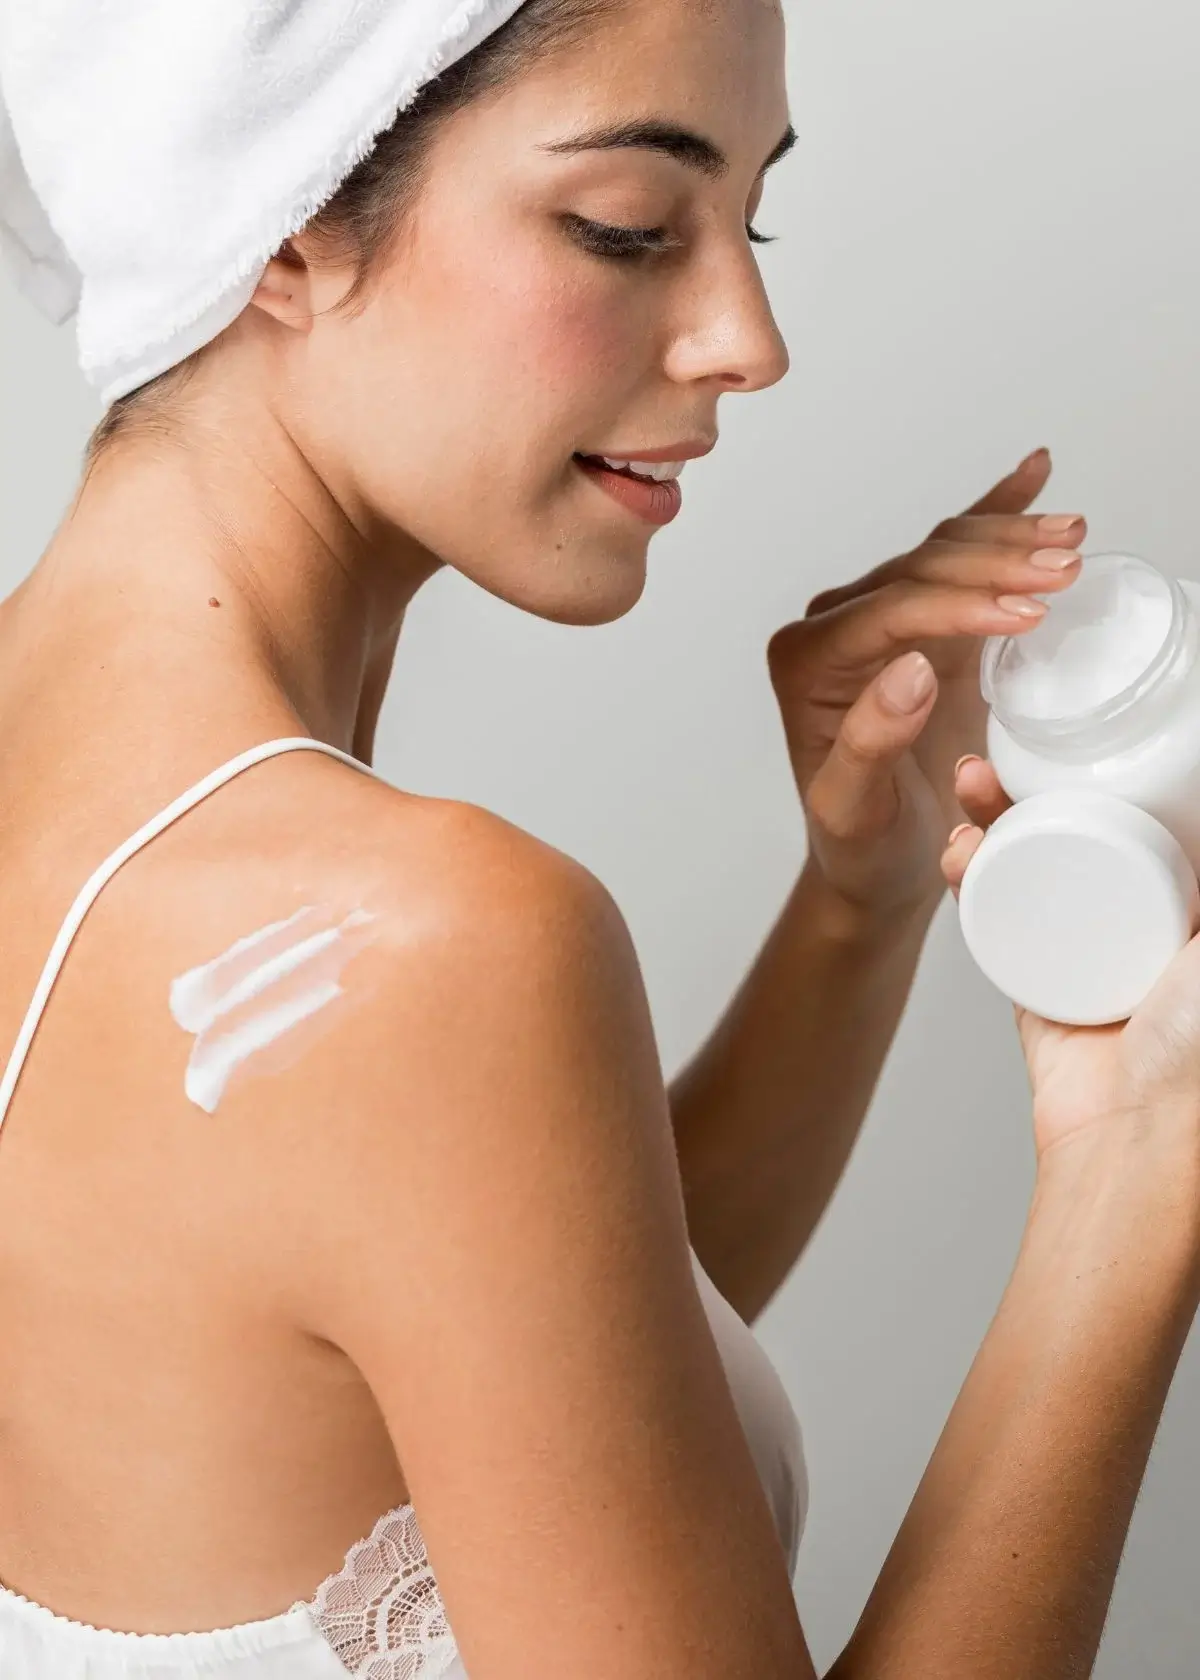 What are the benefits of using retinol body lotion?